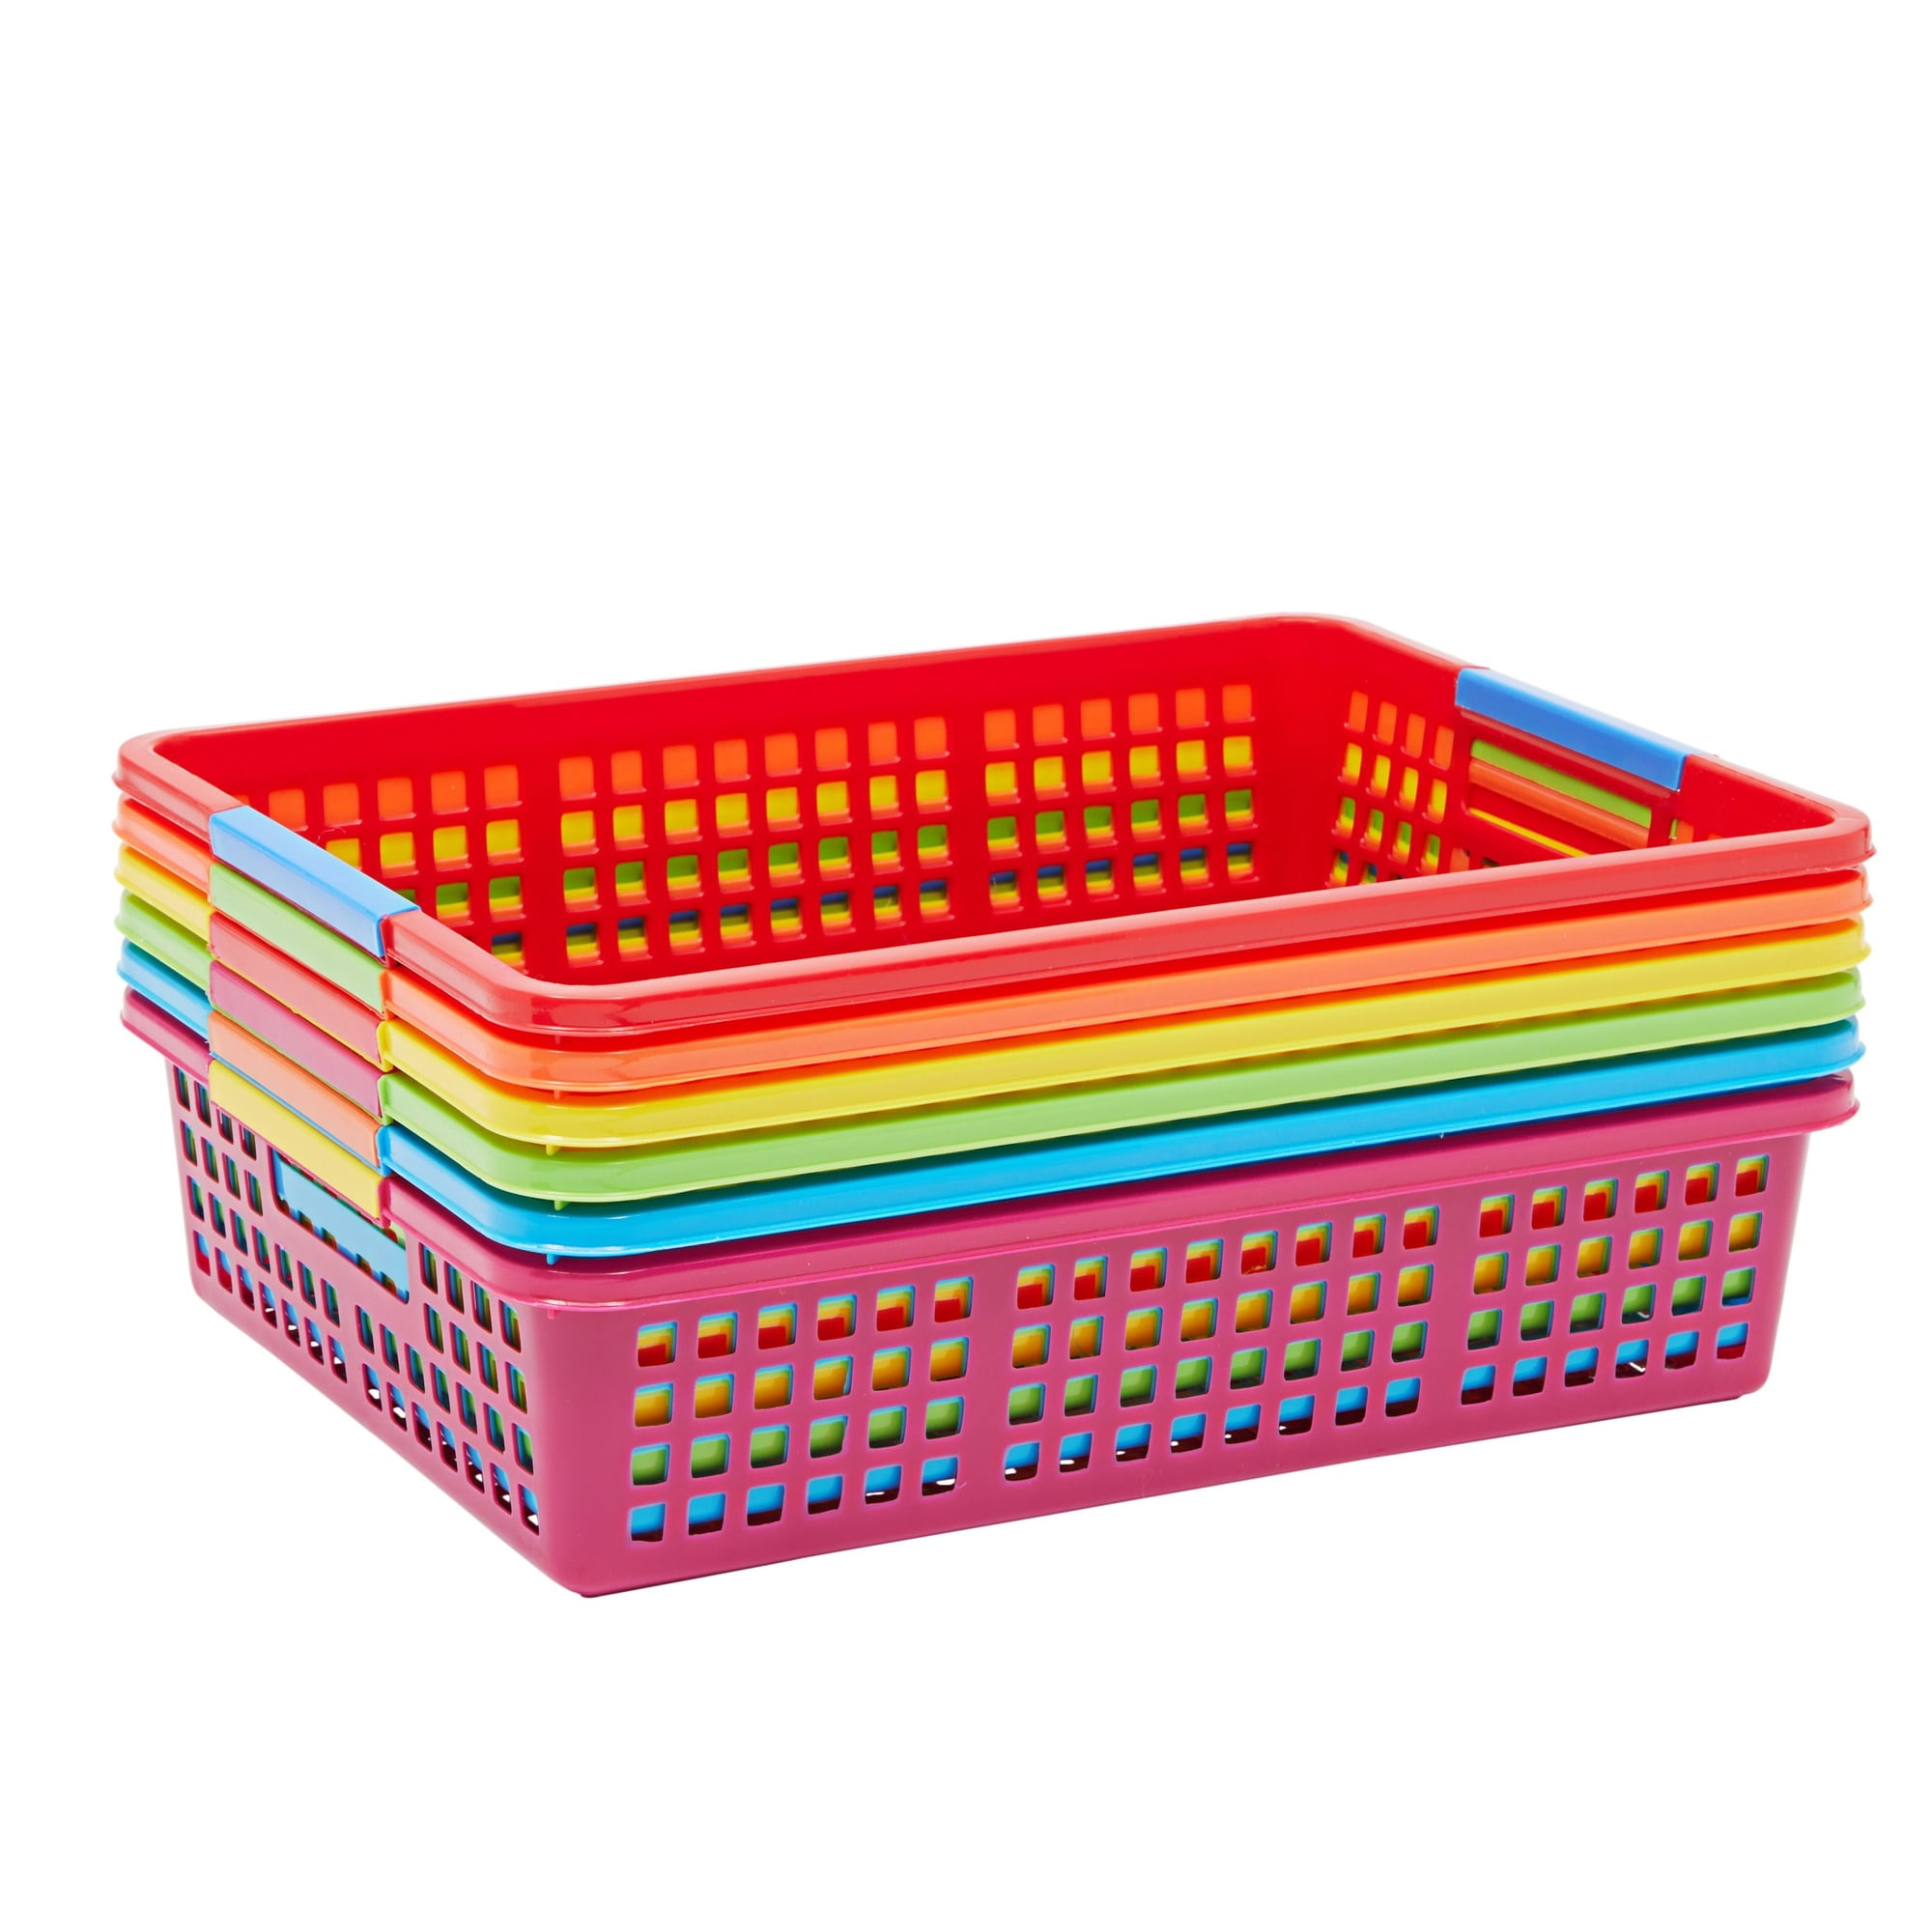 DilaBee Bright Plastic Organizer Bins - 12 Pack â€“Small Colorful Storage  Trays, Modular Baskets Holders for Classroom, Drawers